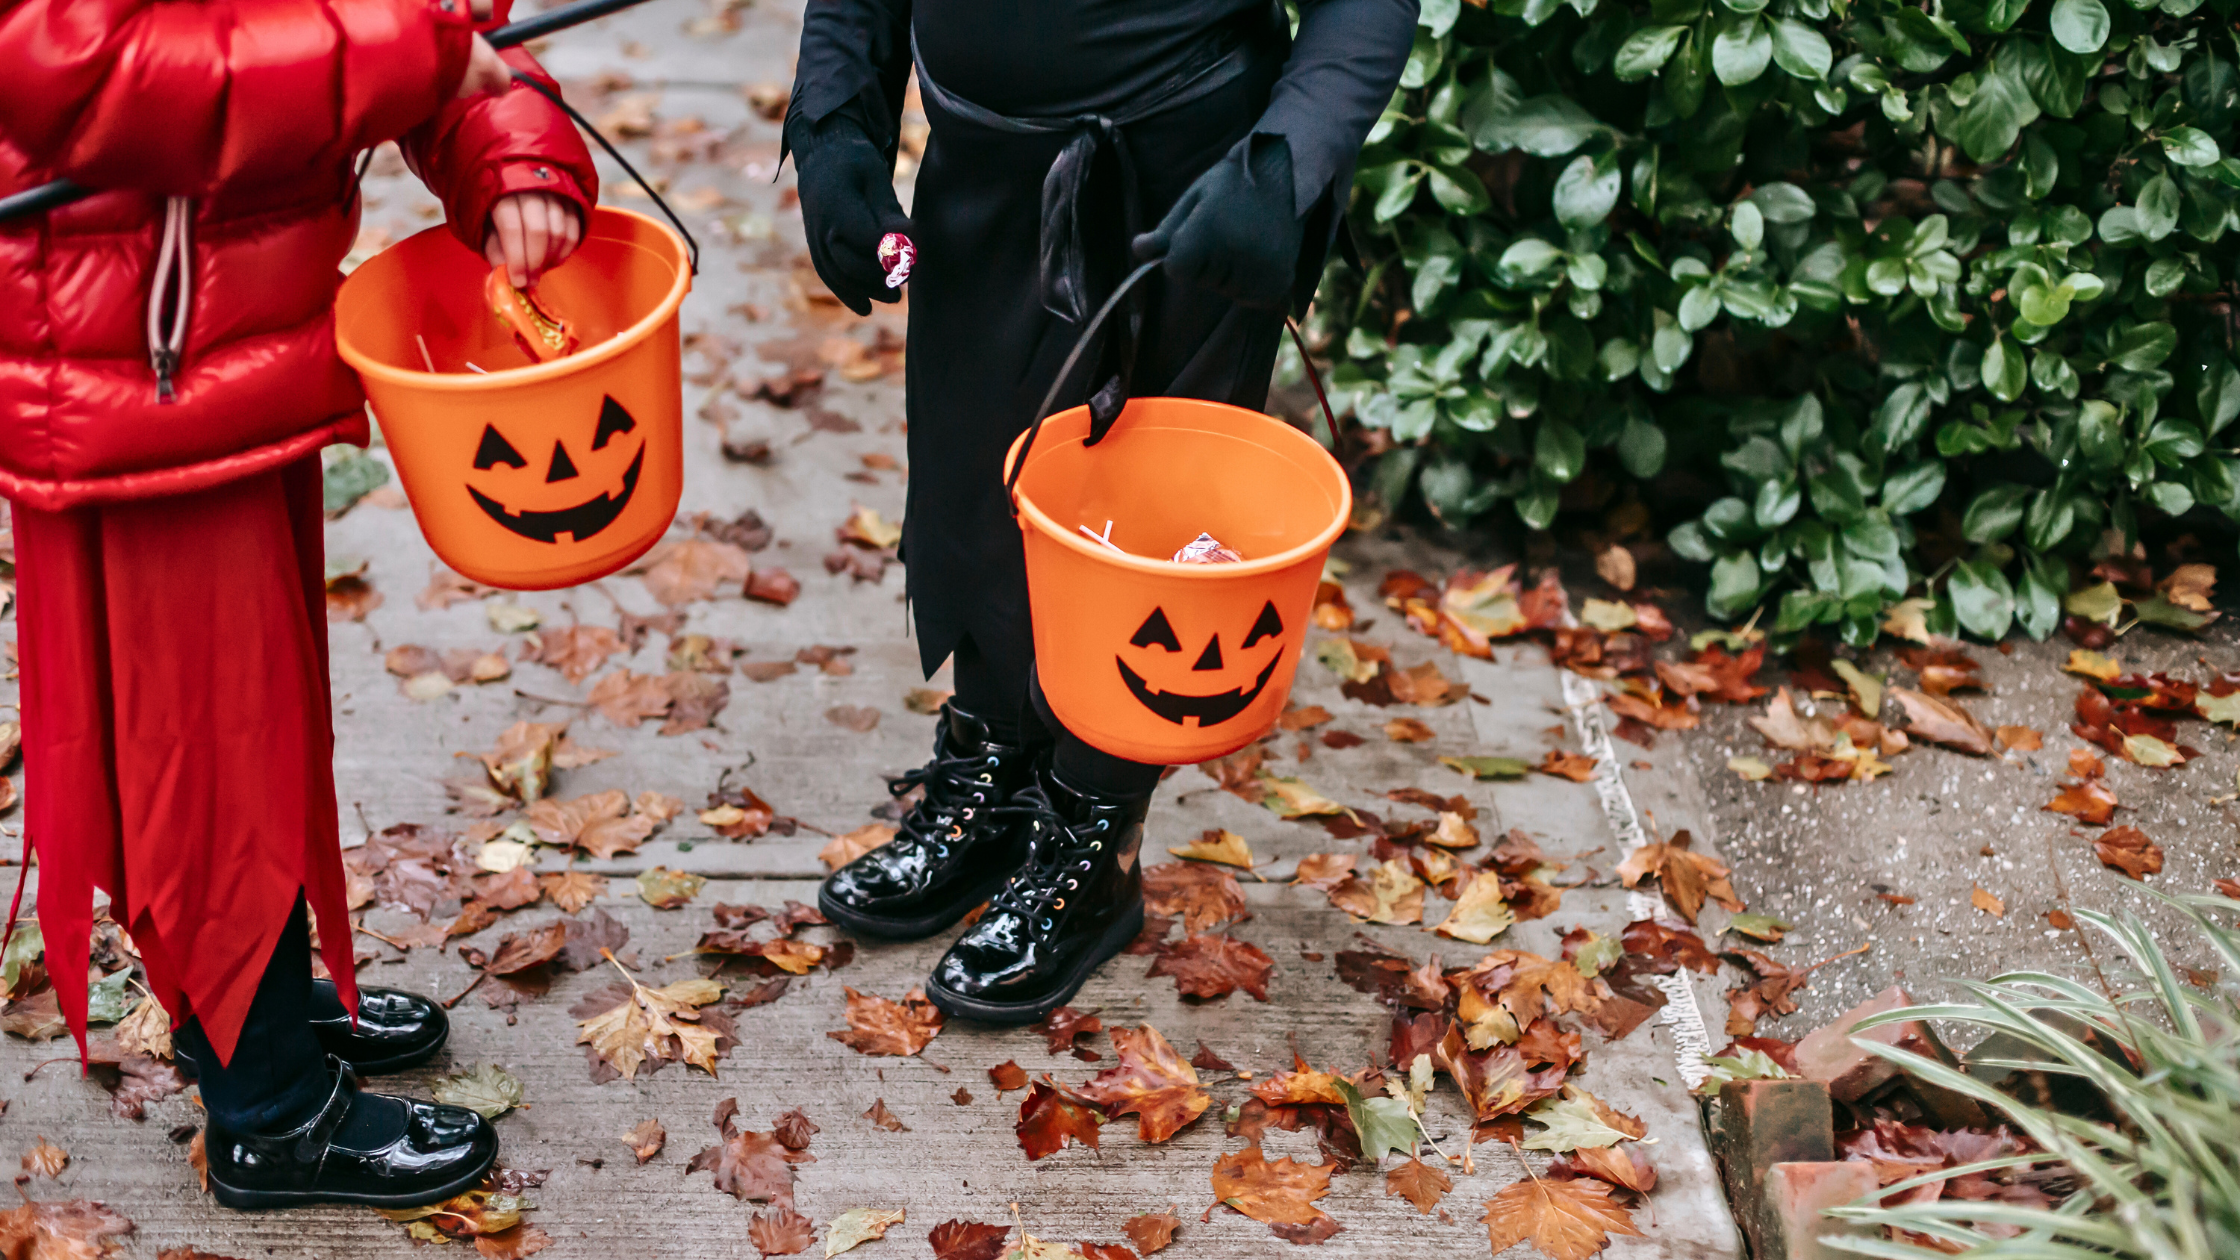 children holding halloween baskets with candy for Trick or Treating